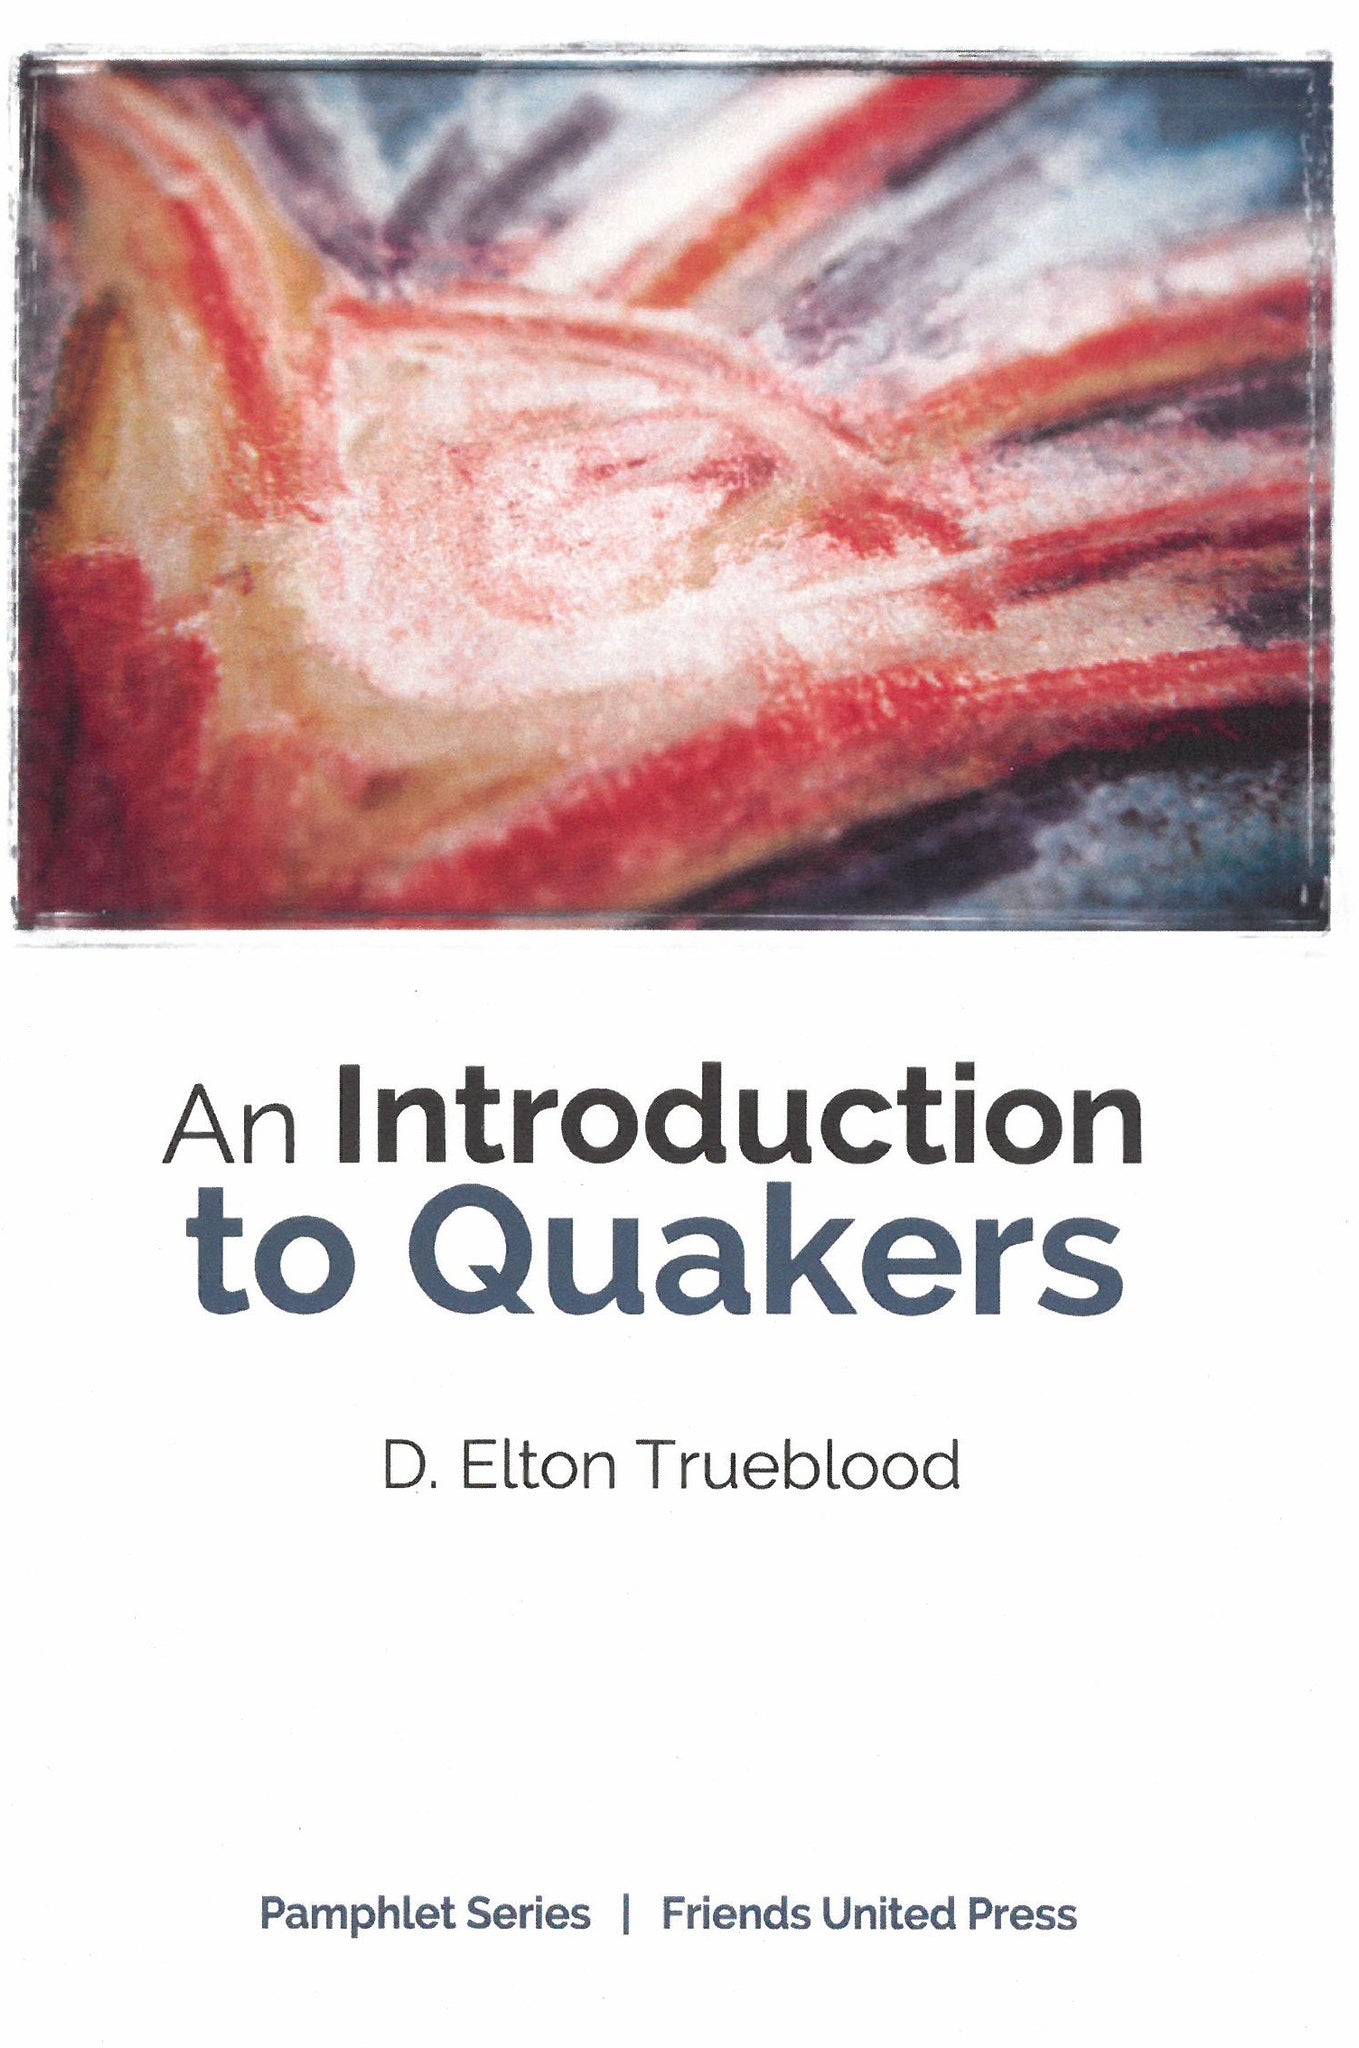 An Introduction to Quakers